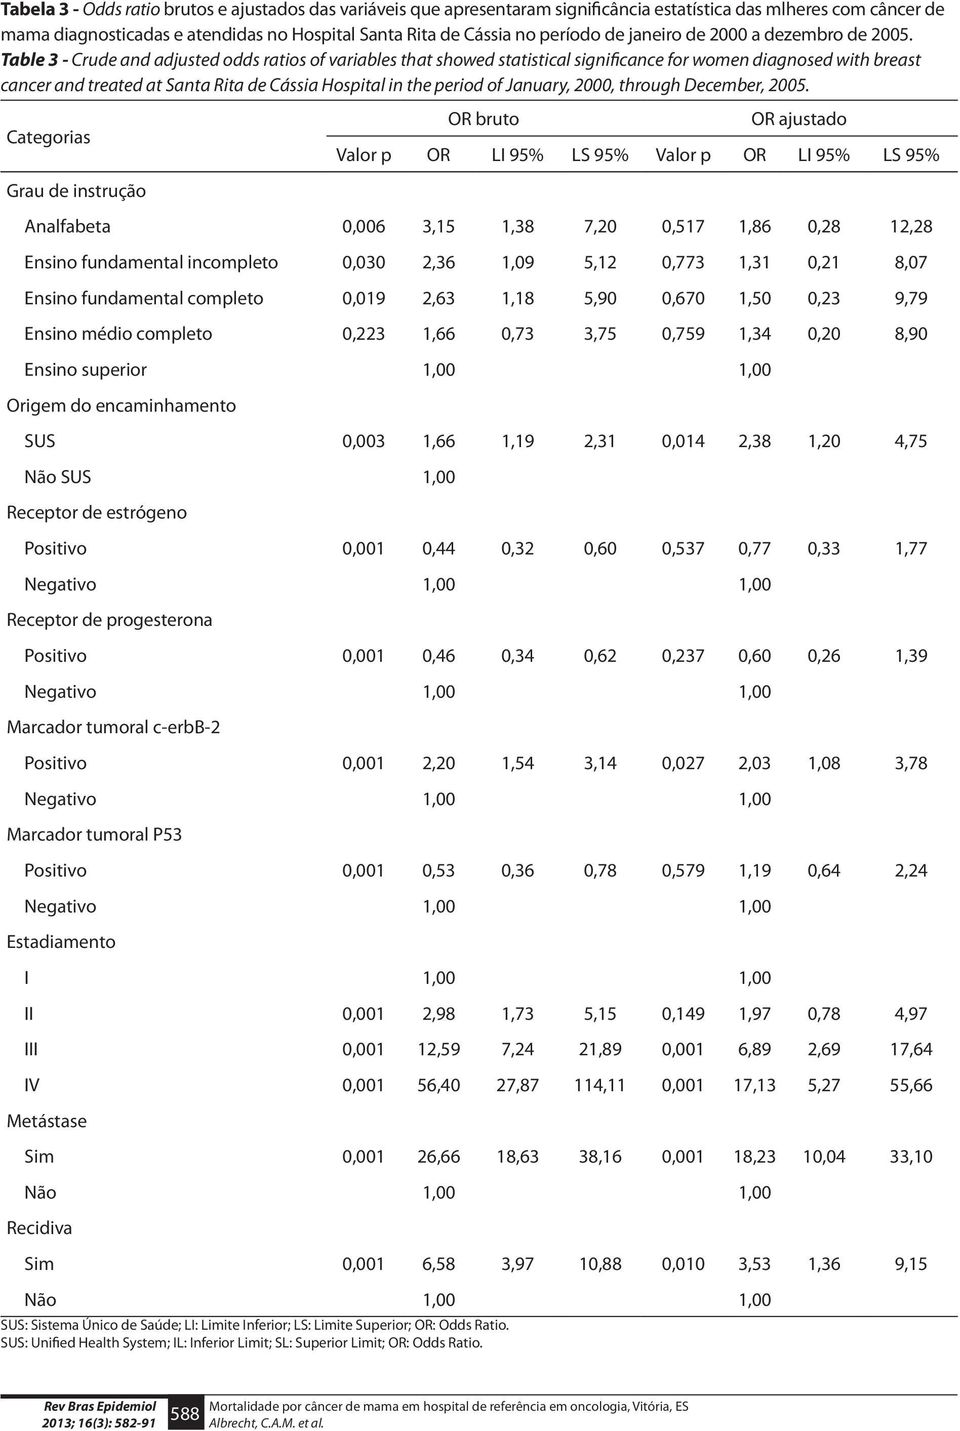 Table 3 - Crude and adjusted odds ratios of variables that showed statistical significance for women diagnosed with breast cancer and treated at Santa Rita de Cássia Hospital in the period of